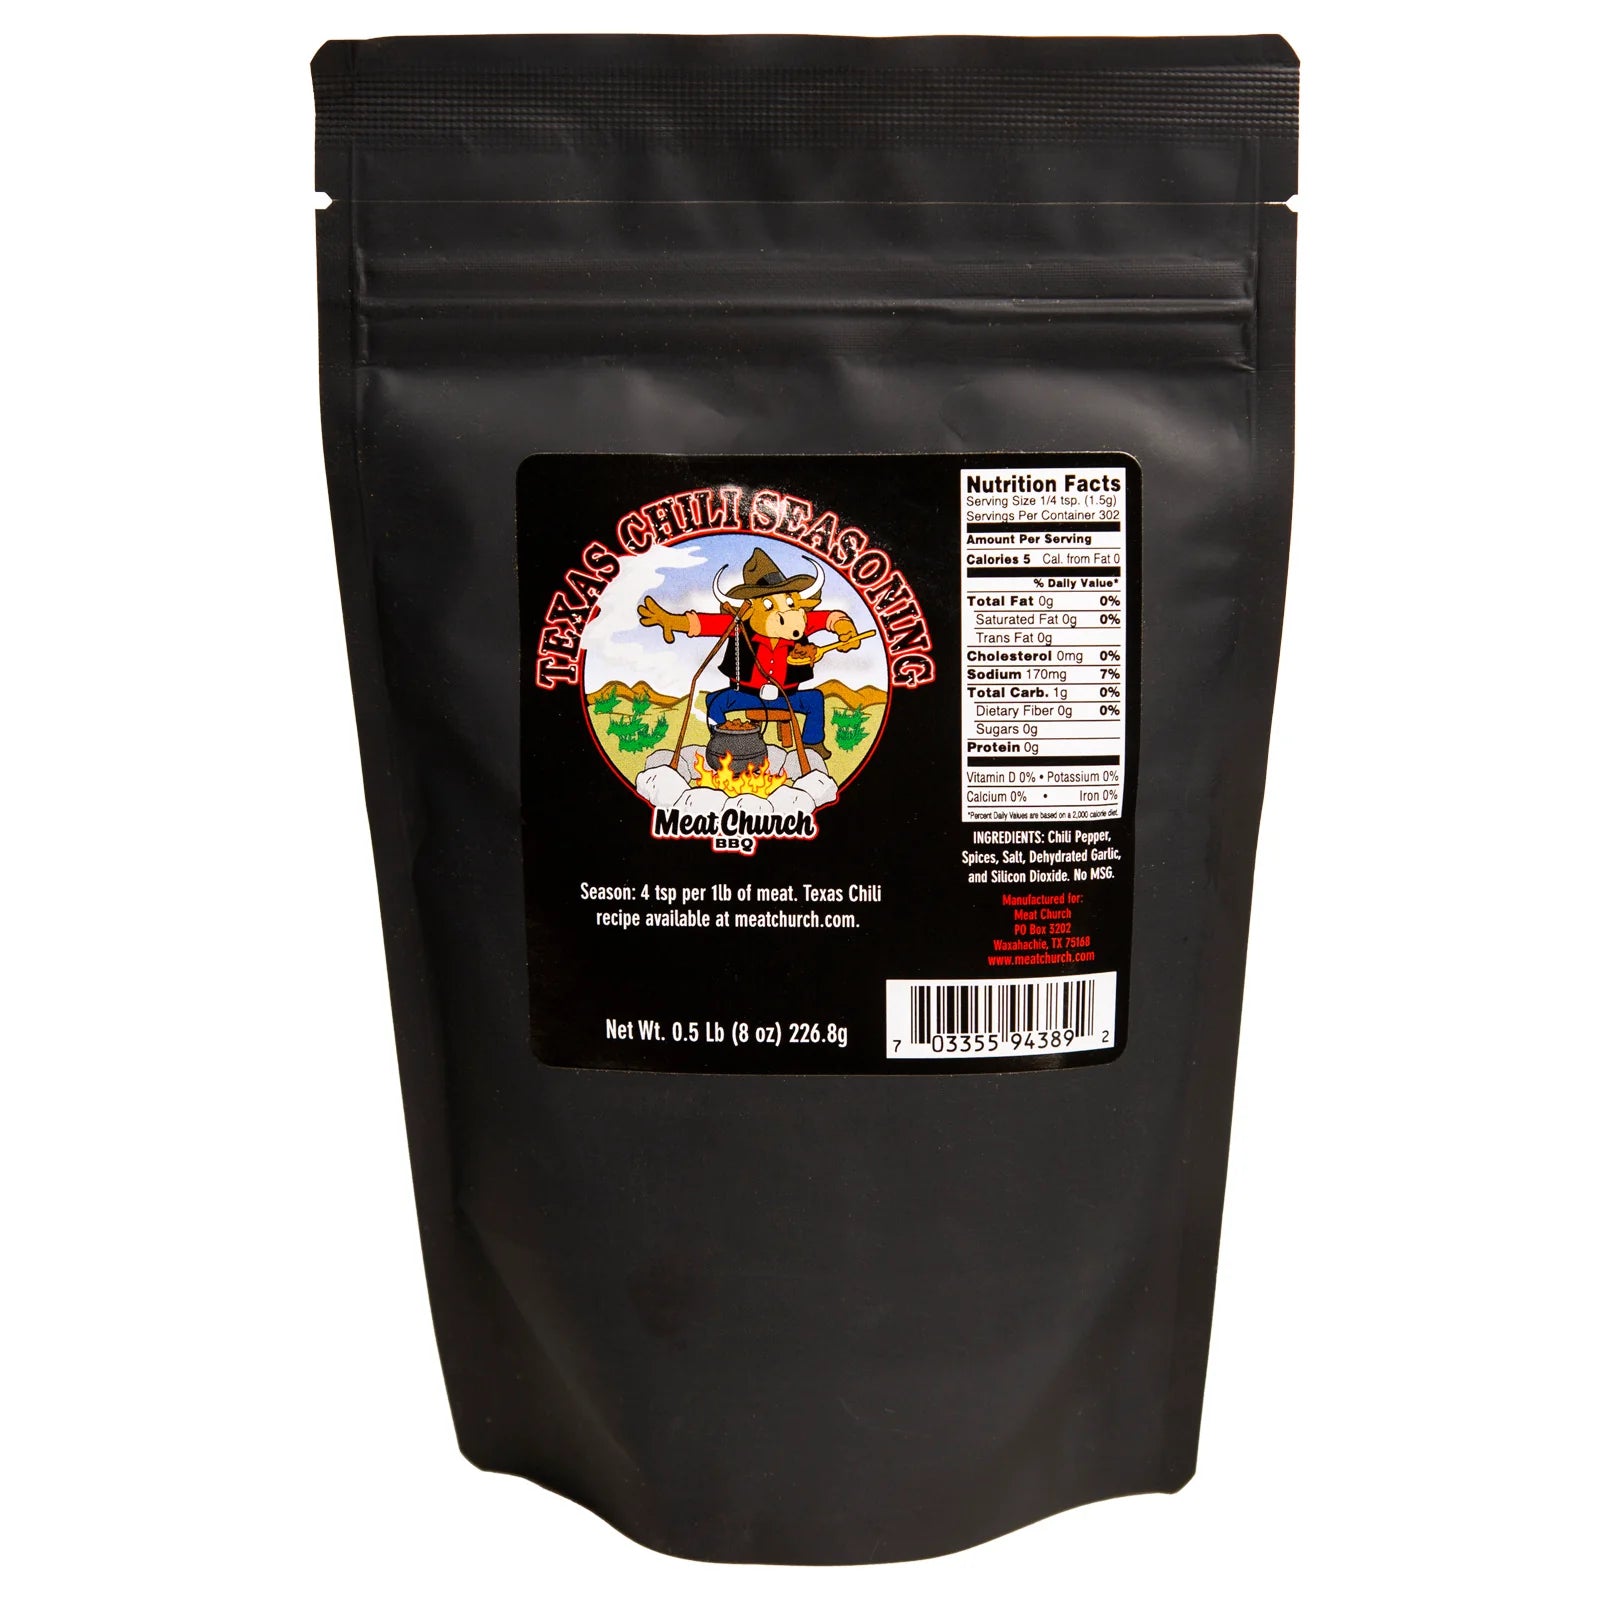 An 8-ounce black bag of Meat Church Texas Chili Seasoning. The label features a cartoon cowboy holding a pot of chili, with a background of a Texas landscape. The bag includes nutrition facts, a barcode, and a recipe suggestion. The seasoning is a coarse, dark red powder.